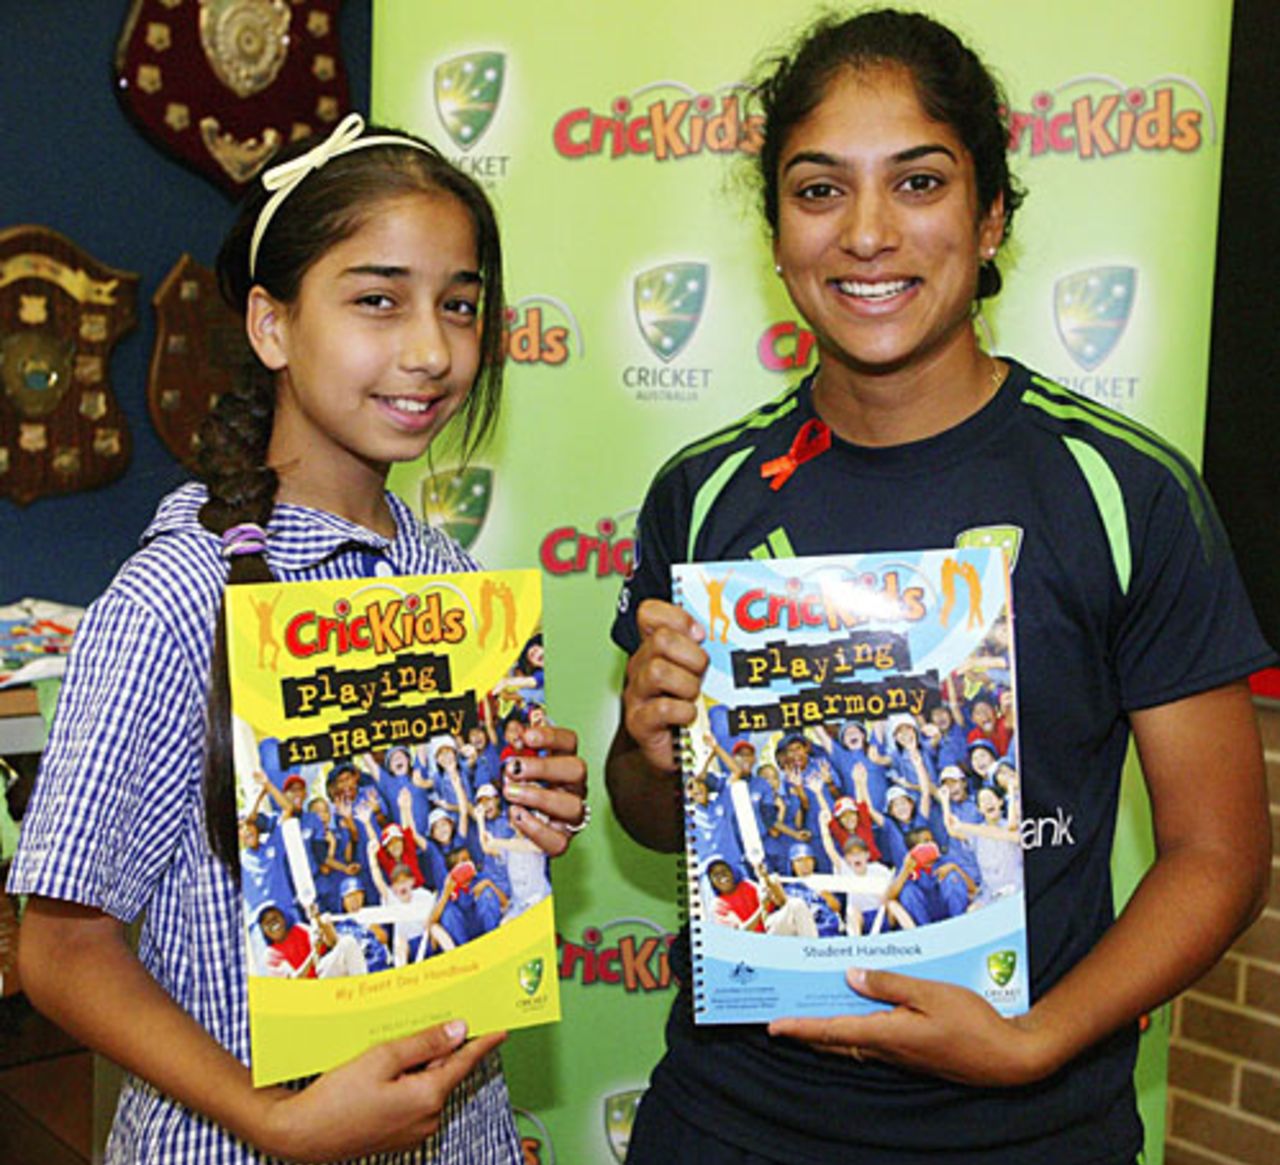 Lisa Sthalekar poses for photos at Cricket Australia's 'Playing in Harmony' school initiative, Sydney, October 23, 2007